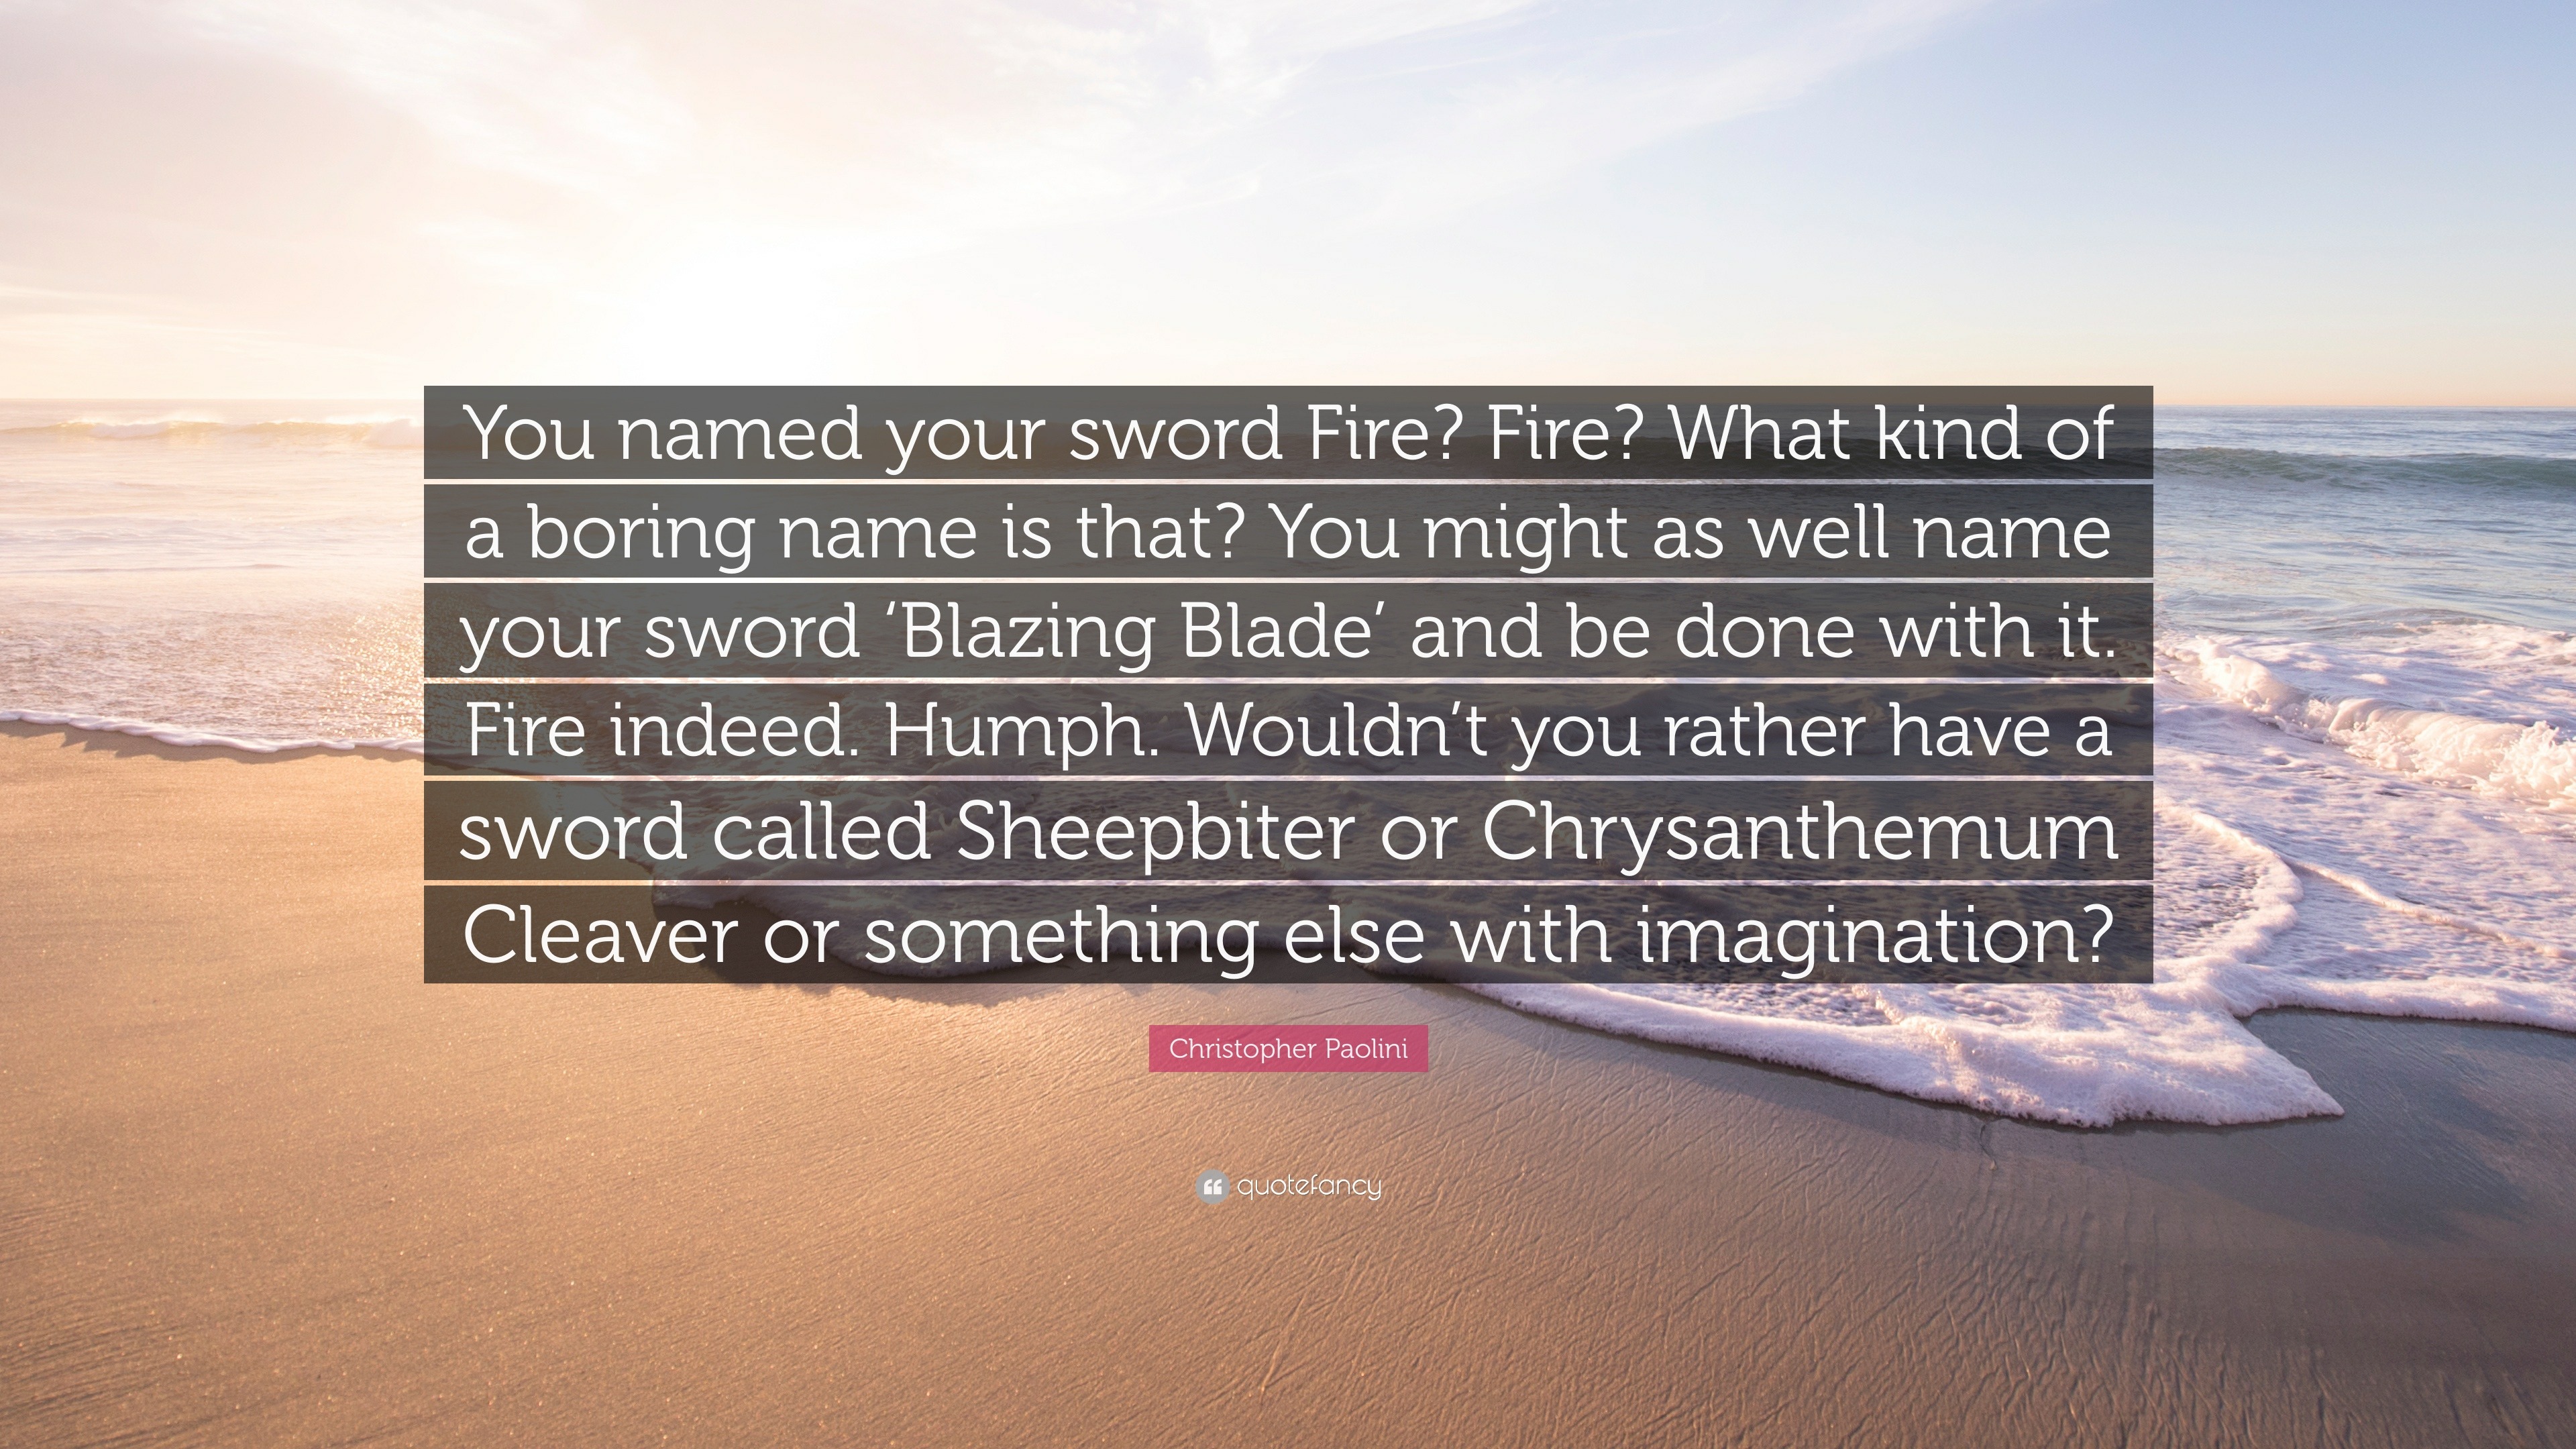 Christopher Paolini Quote: “You Named Your Sword Fire? Fire? What Kind Of A Boring Name Is That? You Might As Well Name Your Sword 'Blazing Blade' A...”